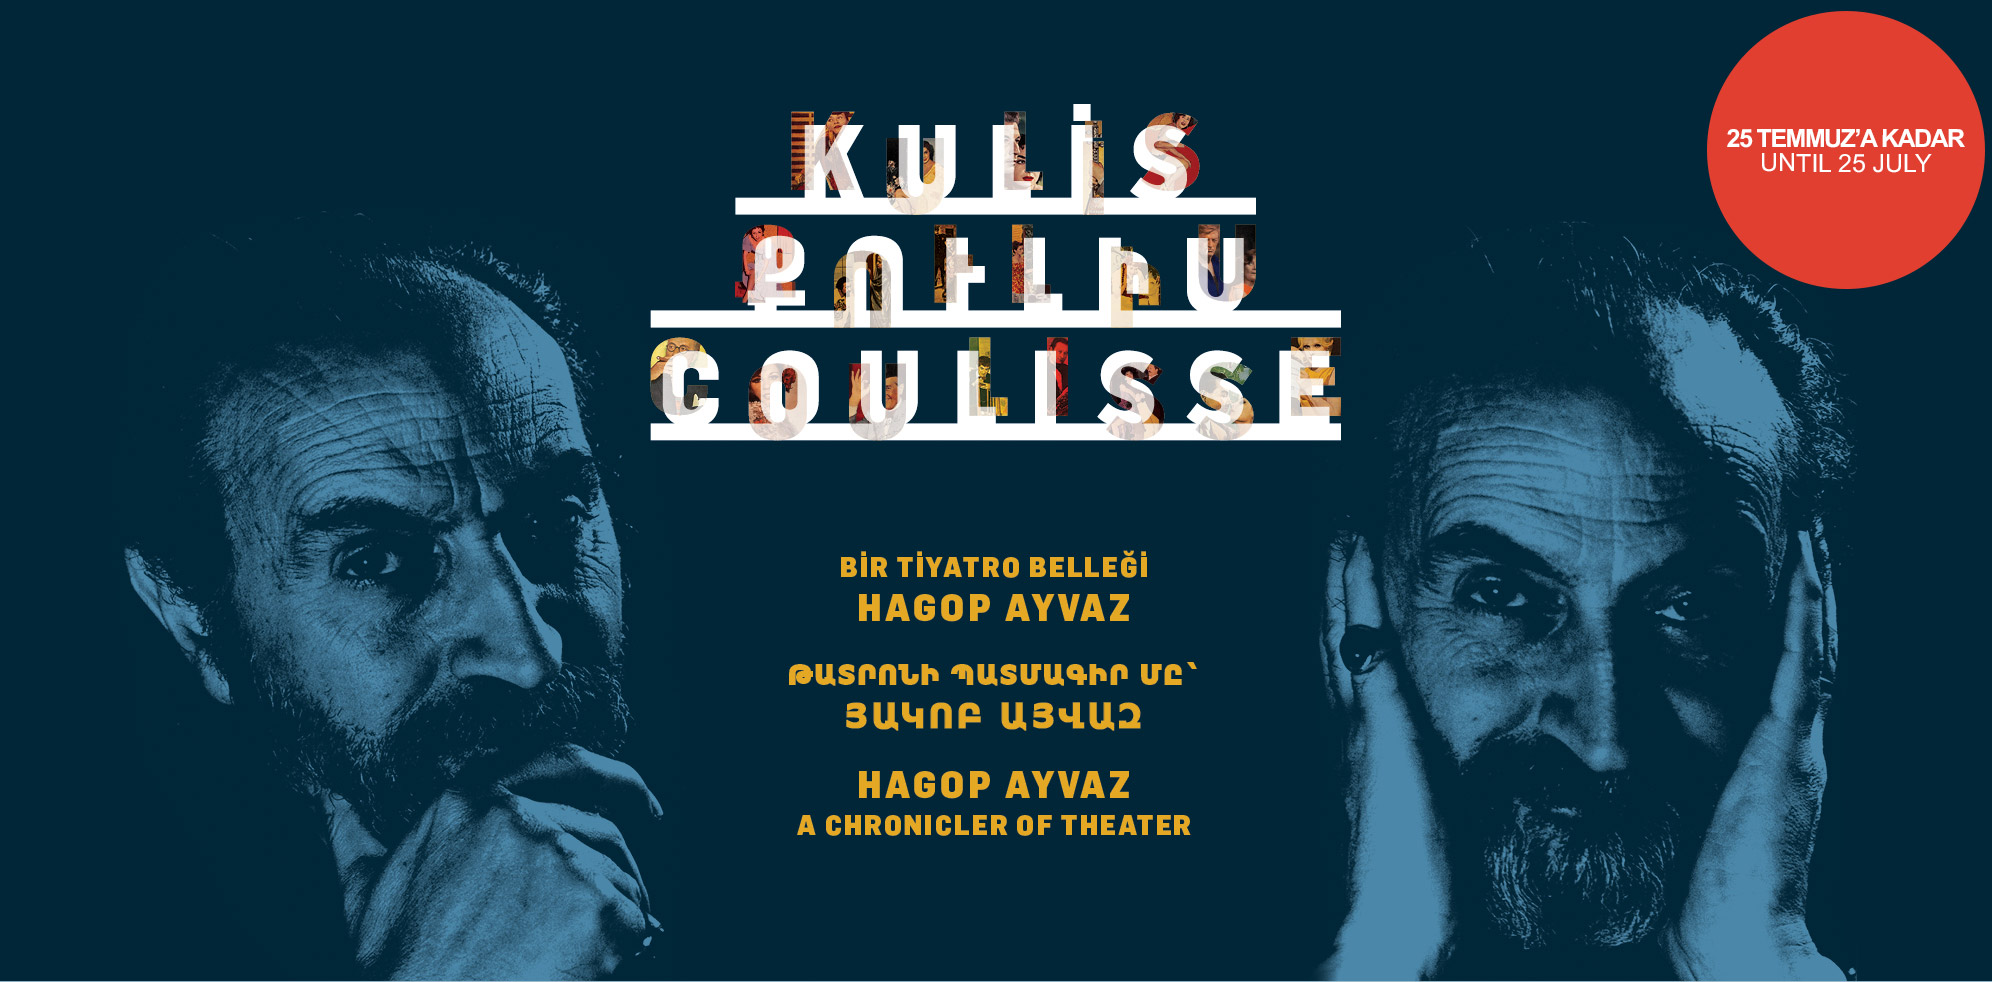 Coulisse: Hagop Ayvaz, A Chronicler of Theater